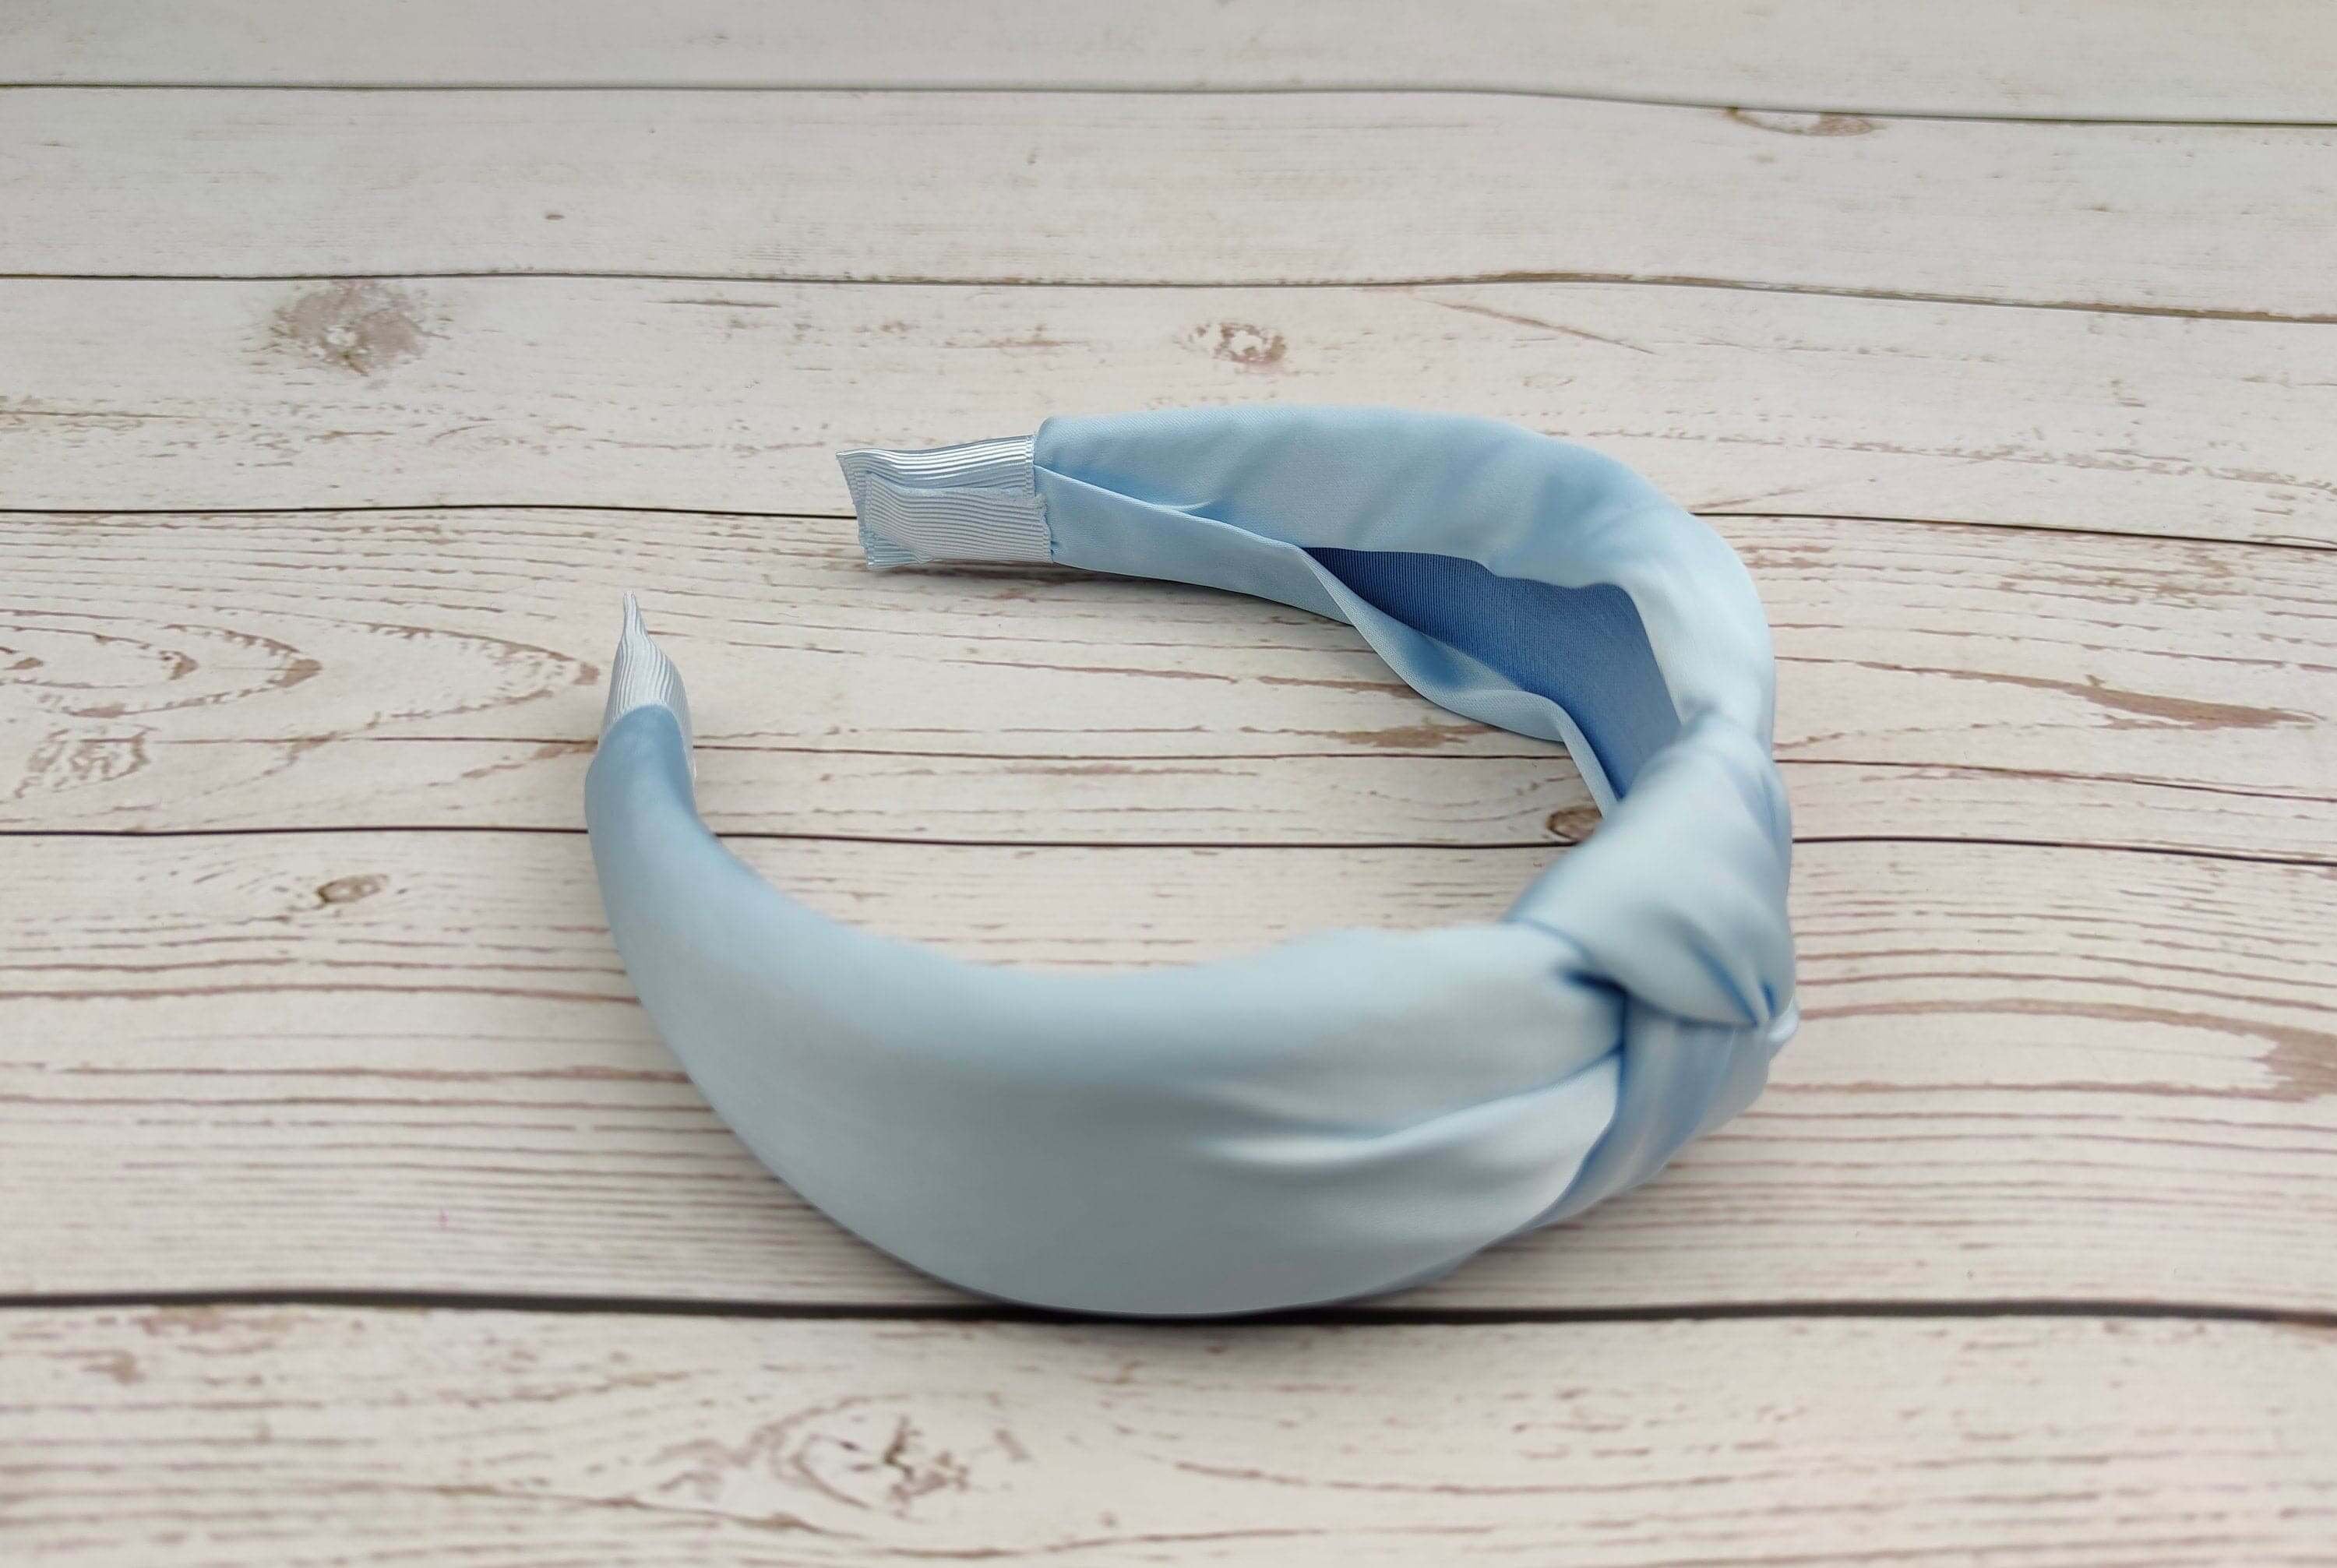 Keep your hair looking perfect all day long with these stylish headbands. Made of soft fabric, these light blue headbands are ideal for keeping your hair in place all day long.